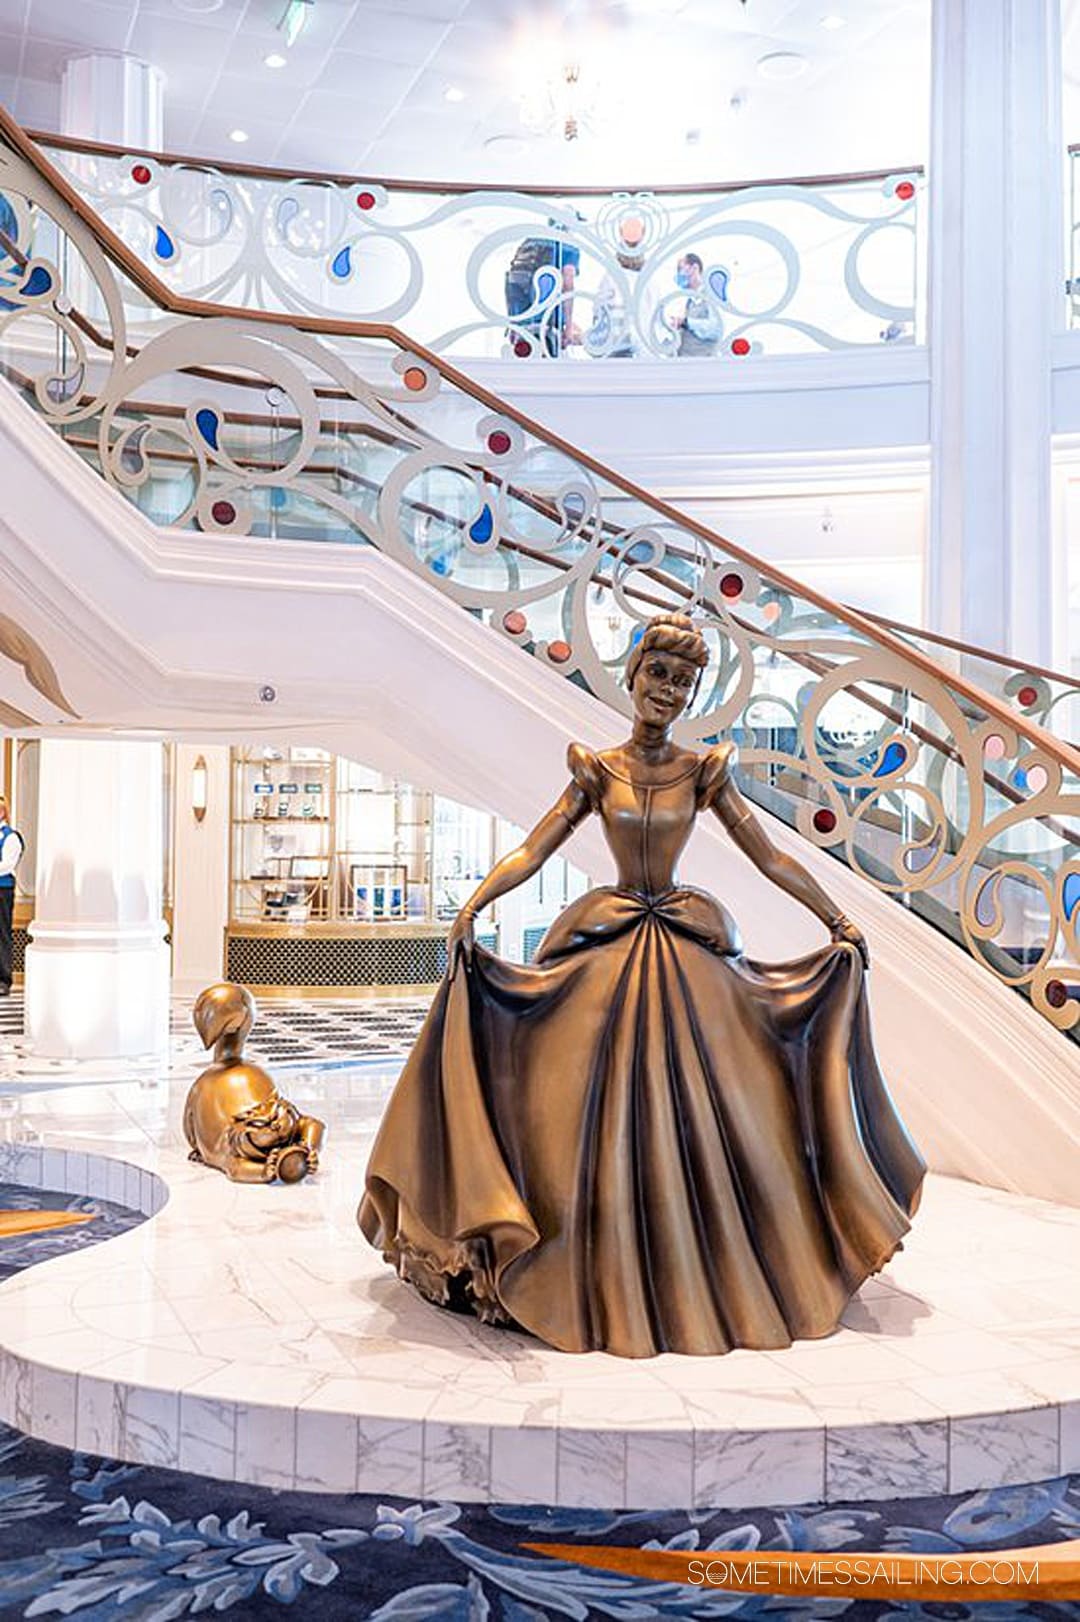 Bronze Cinderella statue with Lucifer the cat behind her on Disney Wish cruise ship in the Grand Hall.